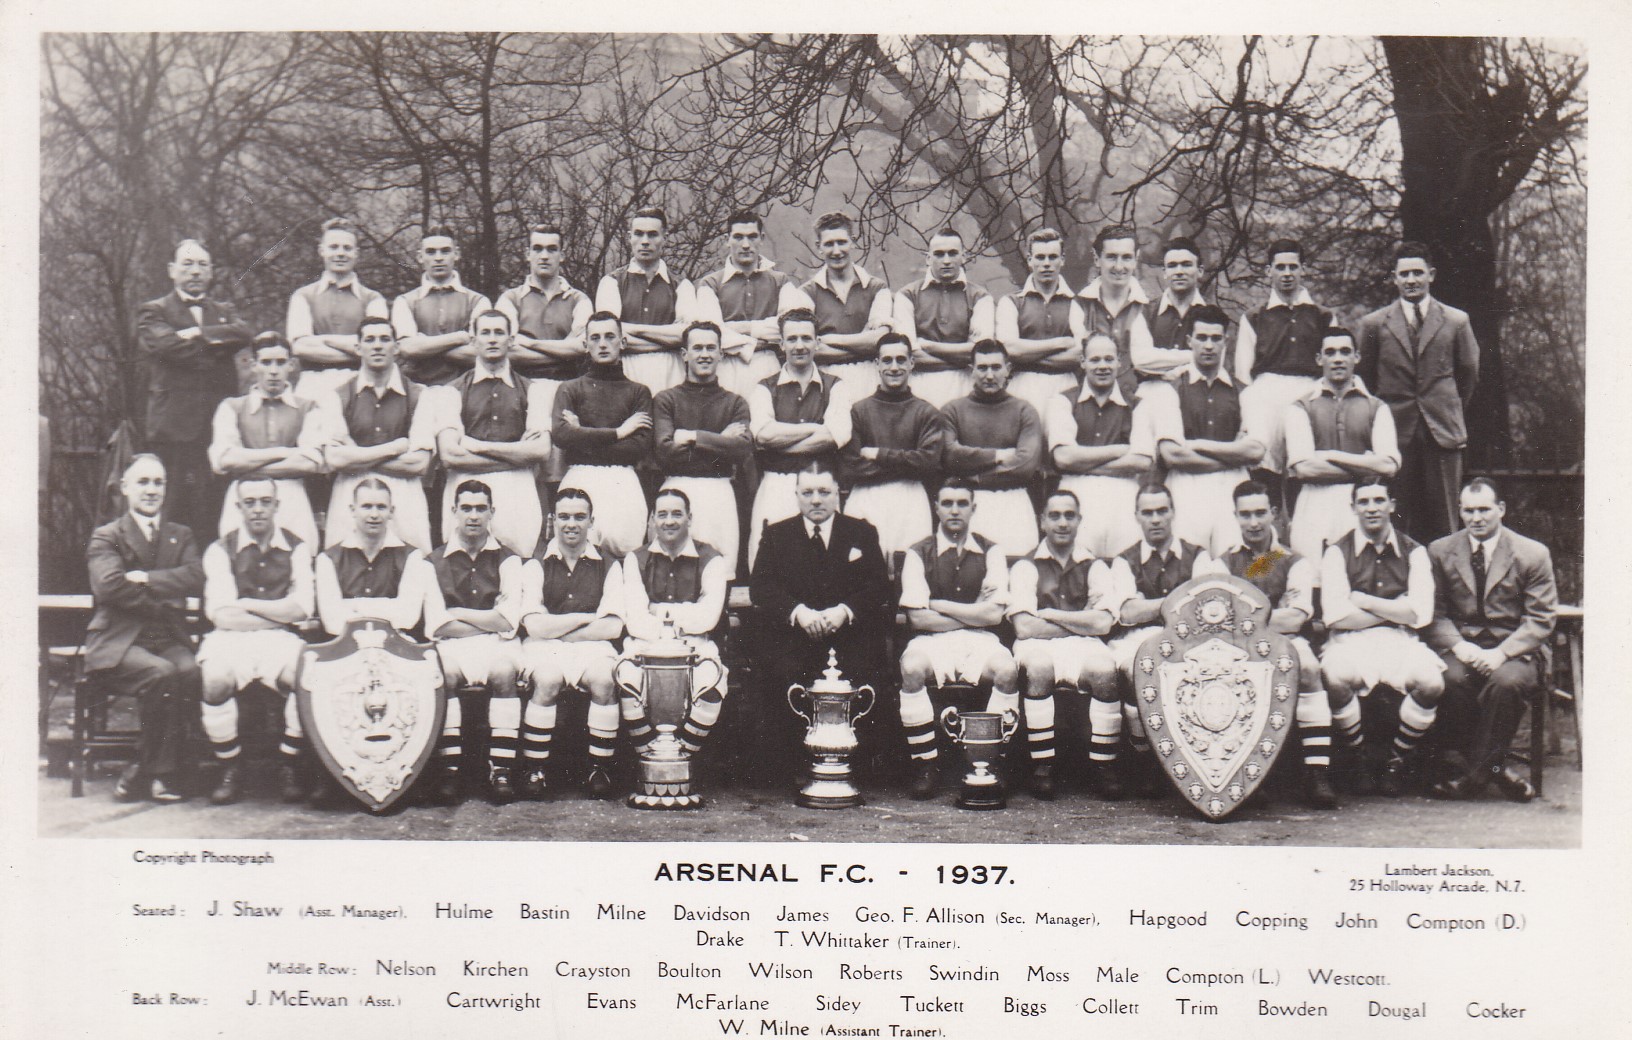 ARSENAL Scarce postcard issued by official Arsenal photographers Lambert Jackson, team group 1937 - Image 3 of 3